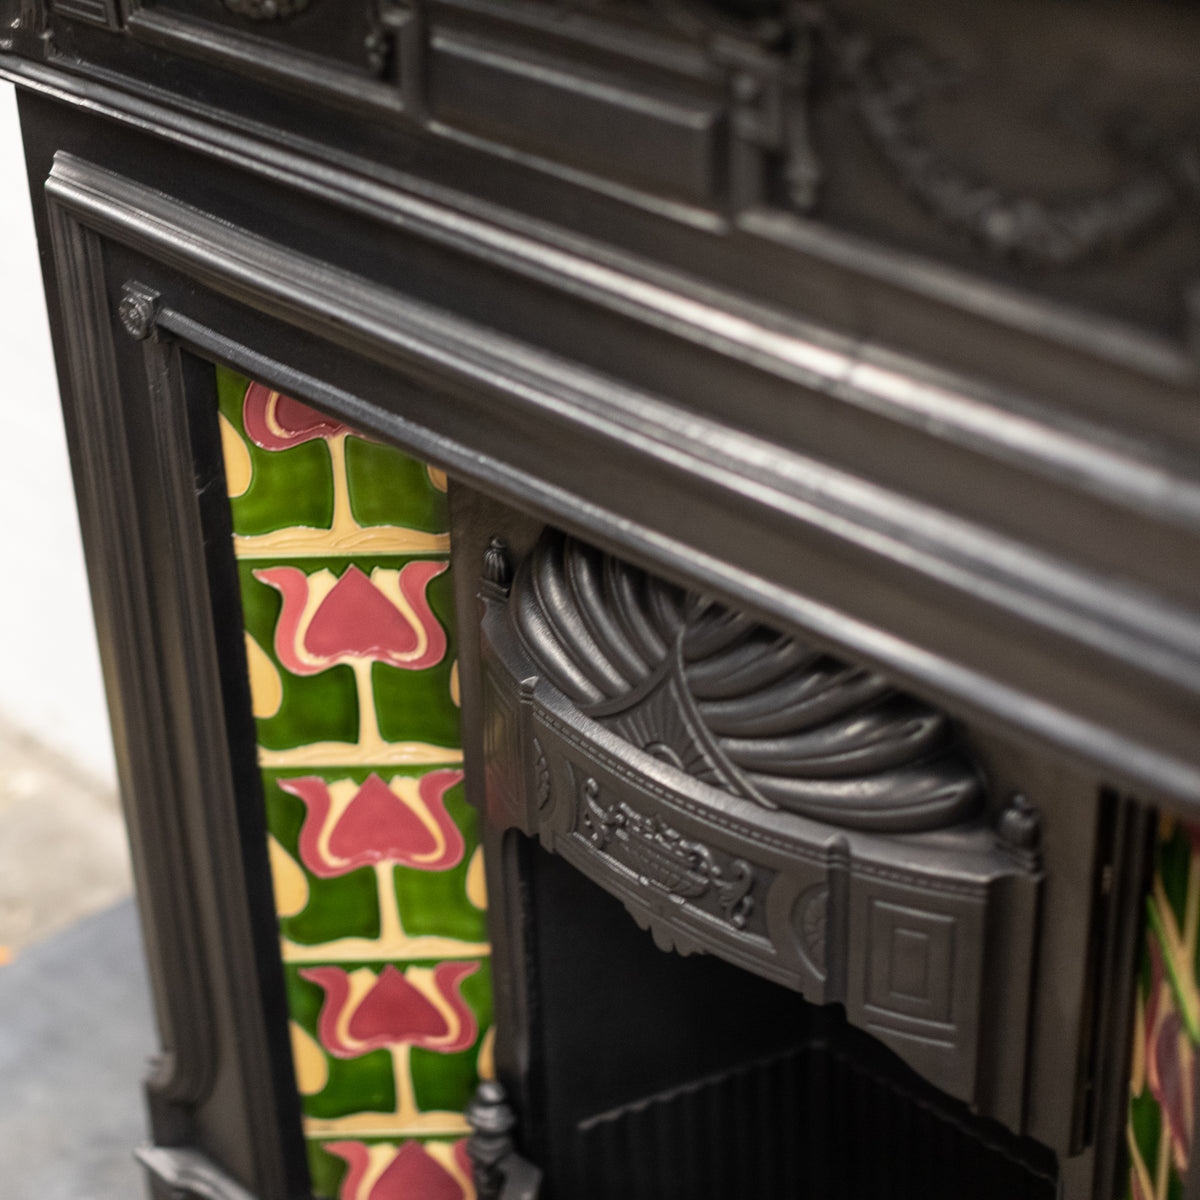 Antique Art Nouveau Combination Fireplace with Green &amp; Red Tiles | The Architectural Forum